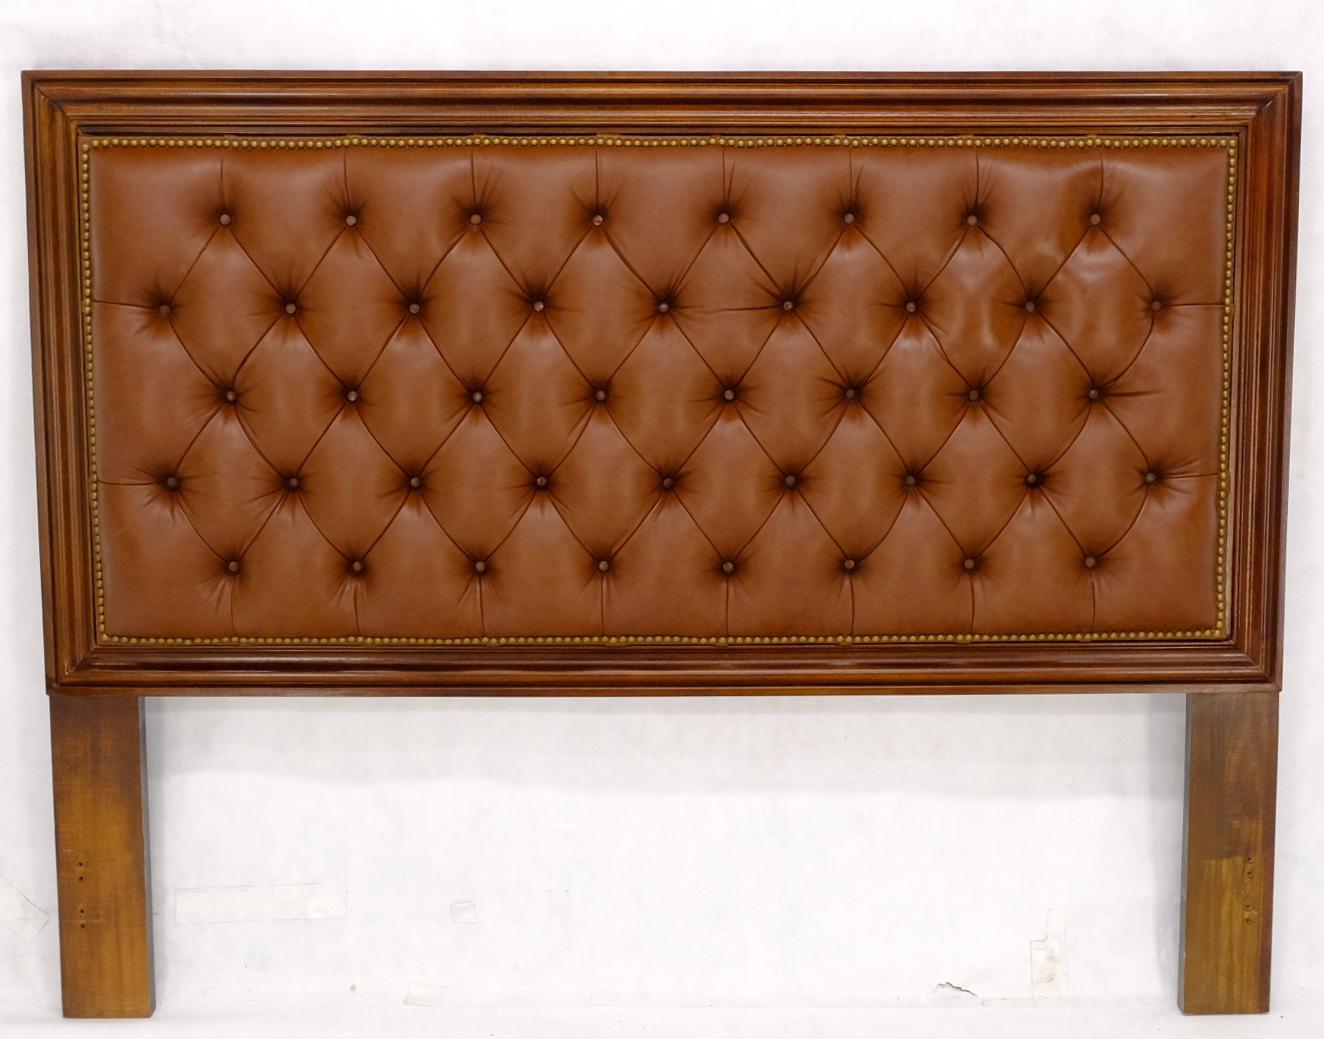 Brown to tan tufted leather custom Chesterfield headboard.